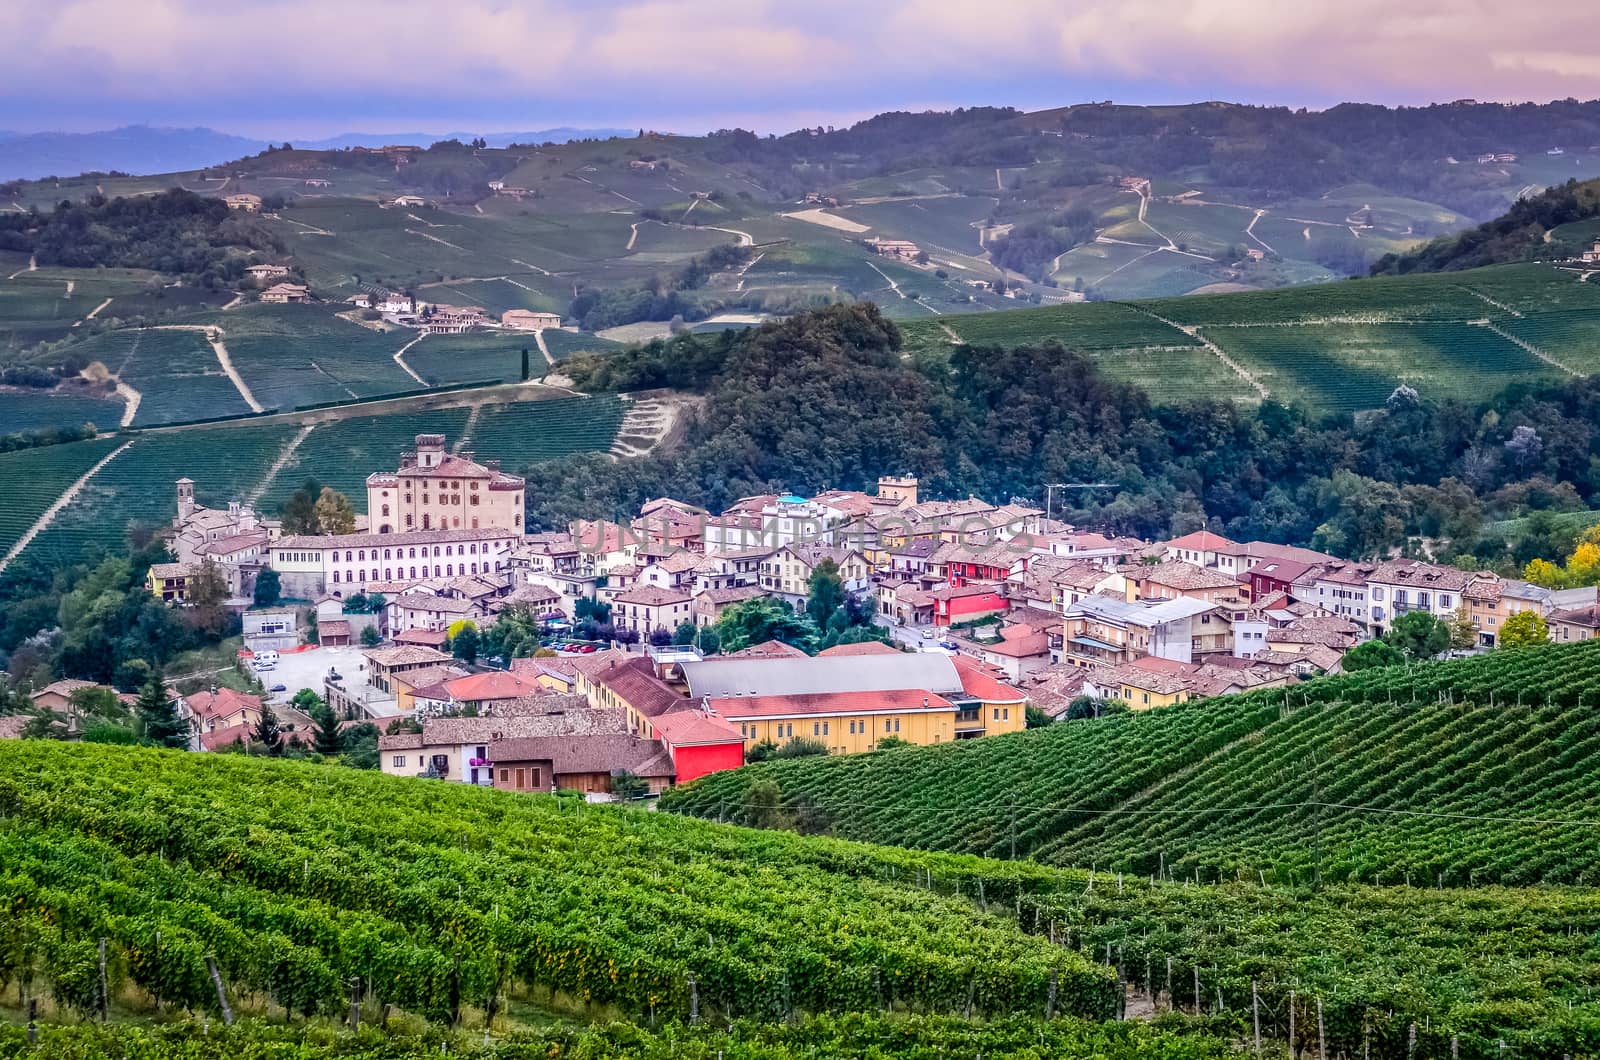 Scenic view of Barolo village in Piemont area, Italy